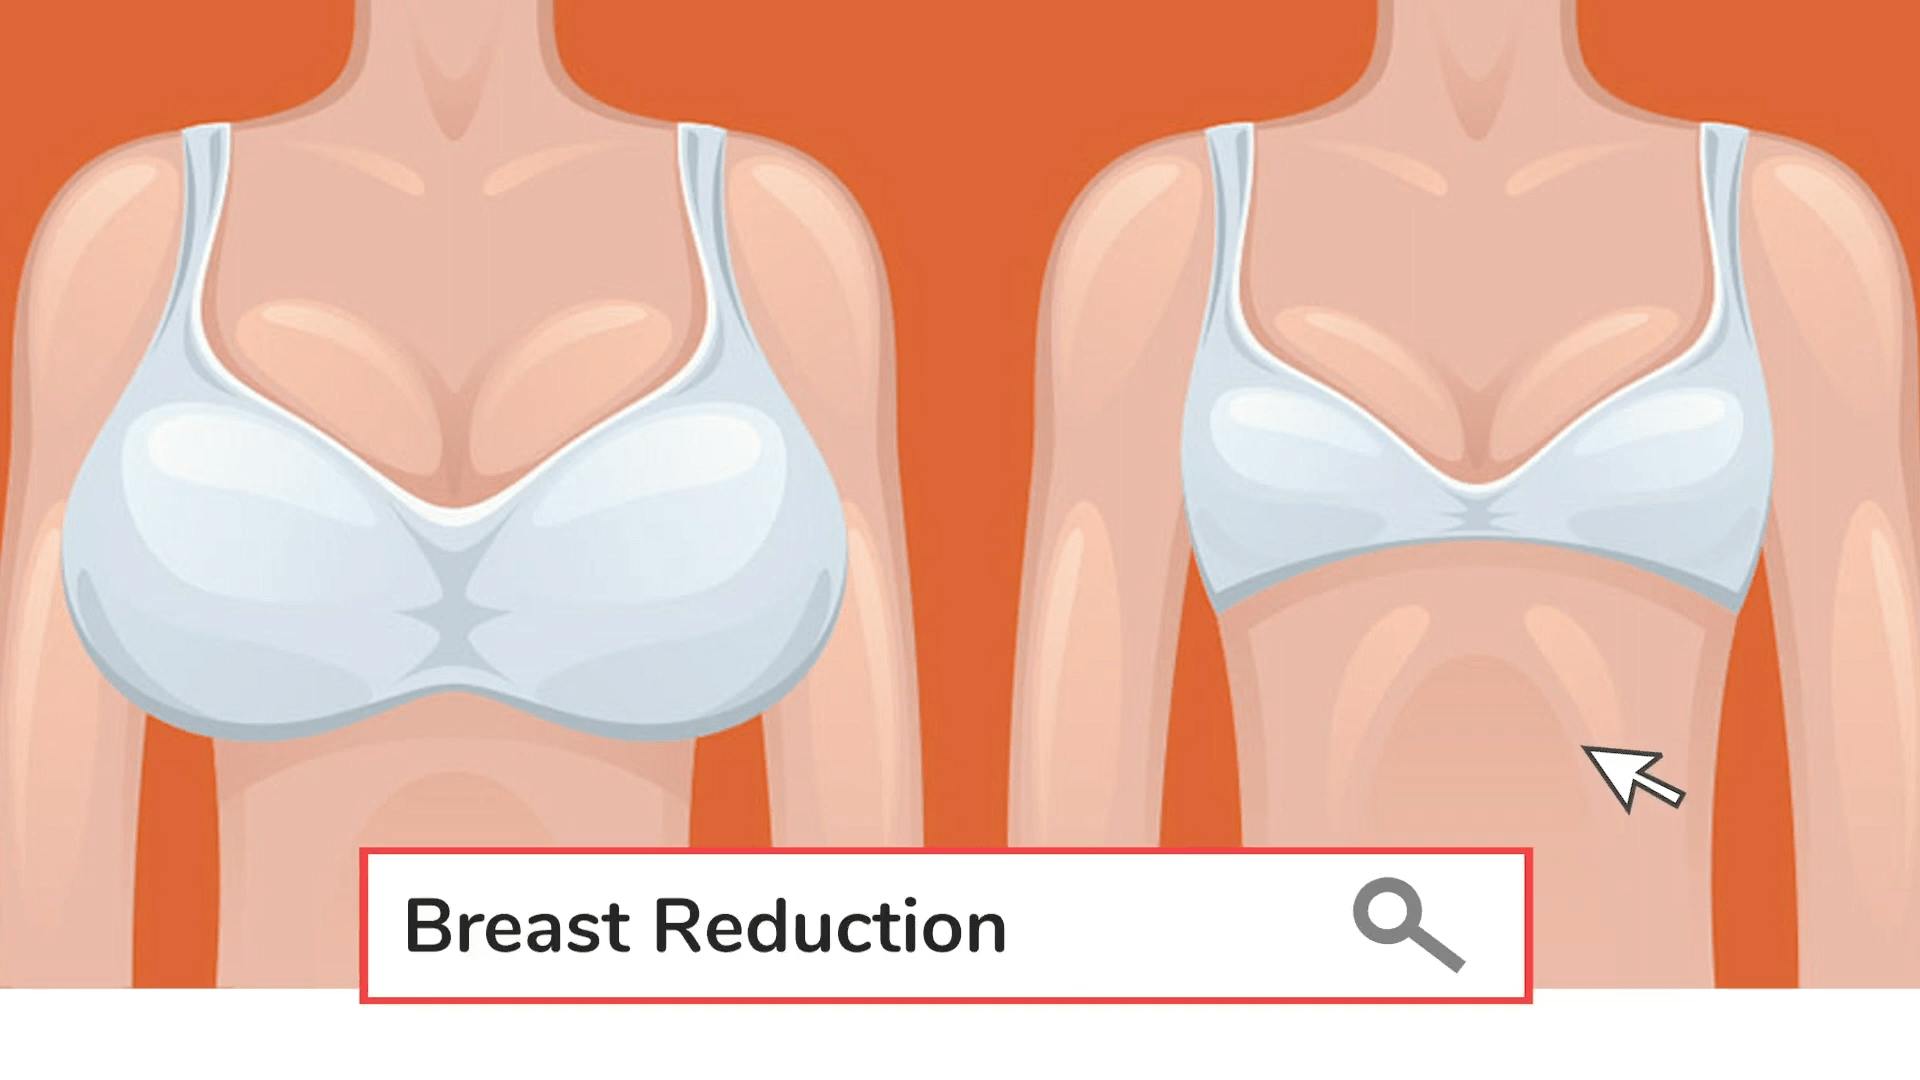 Breast reduction infographic